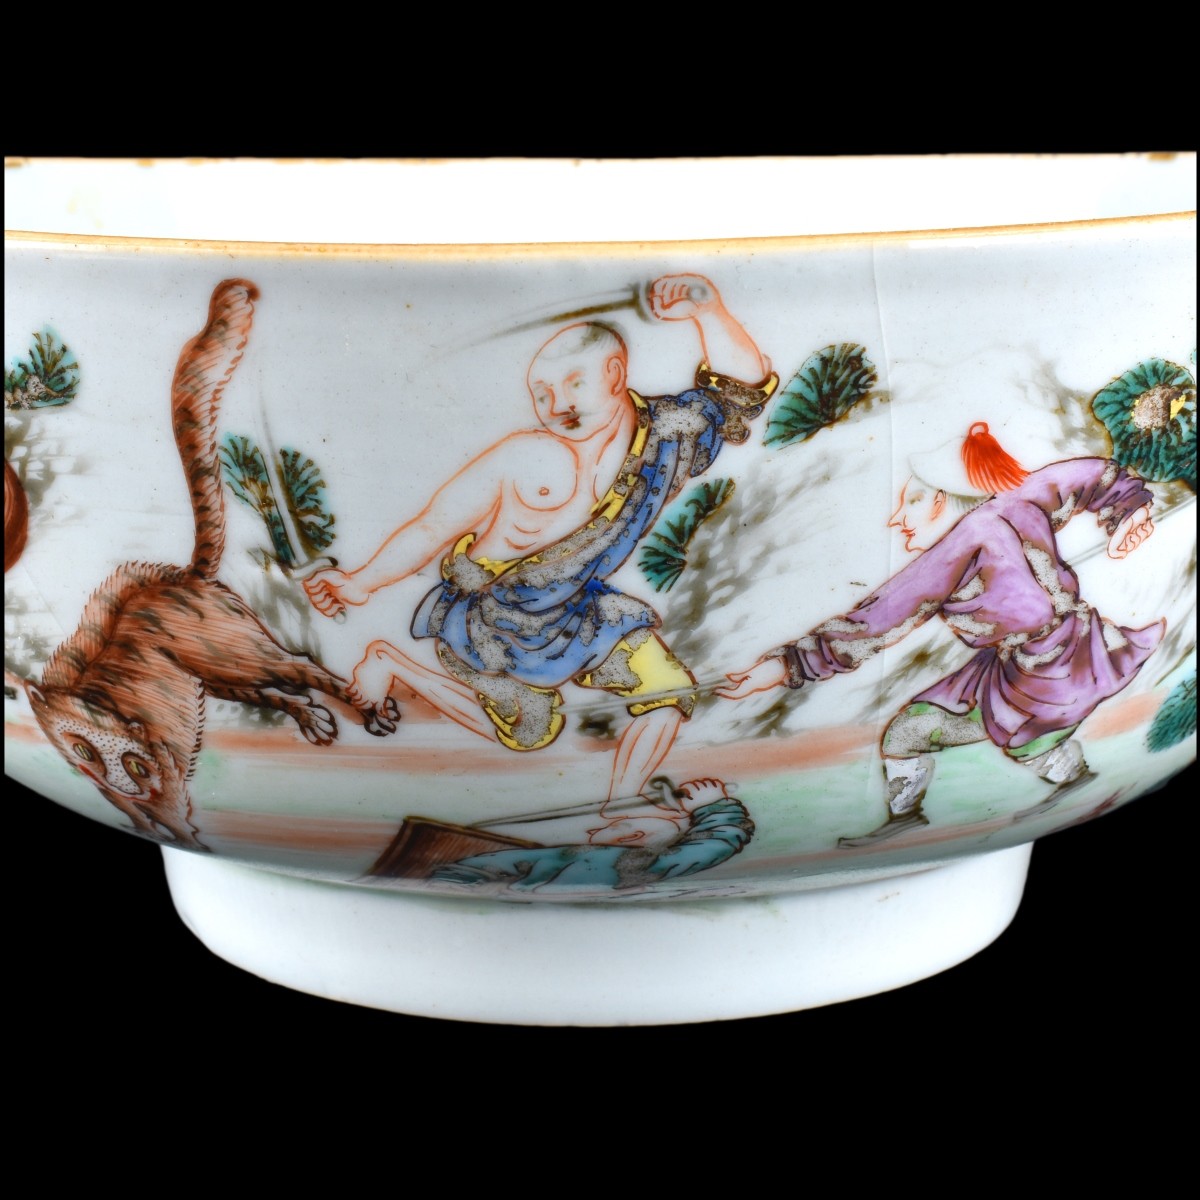 18th C Chinese Porcelain Bowl